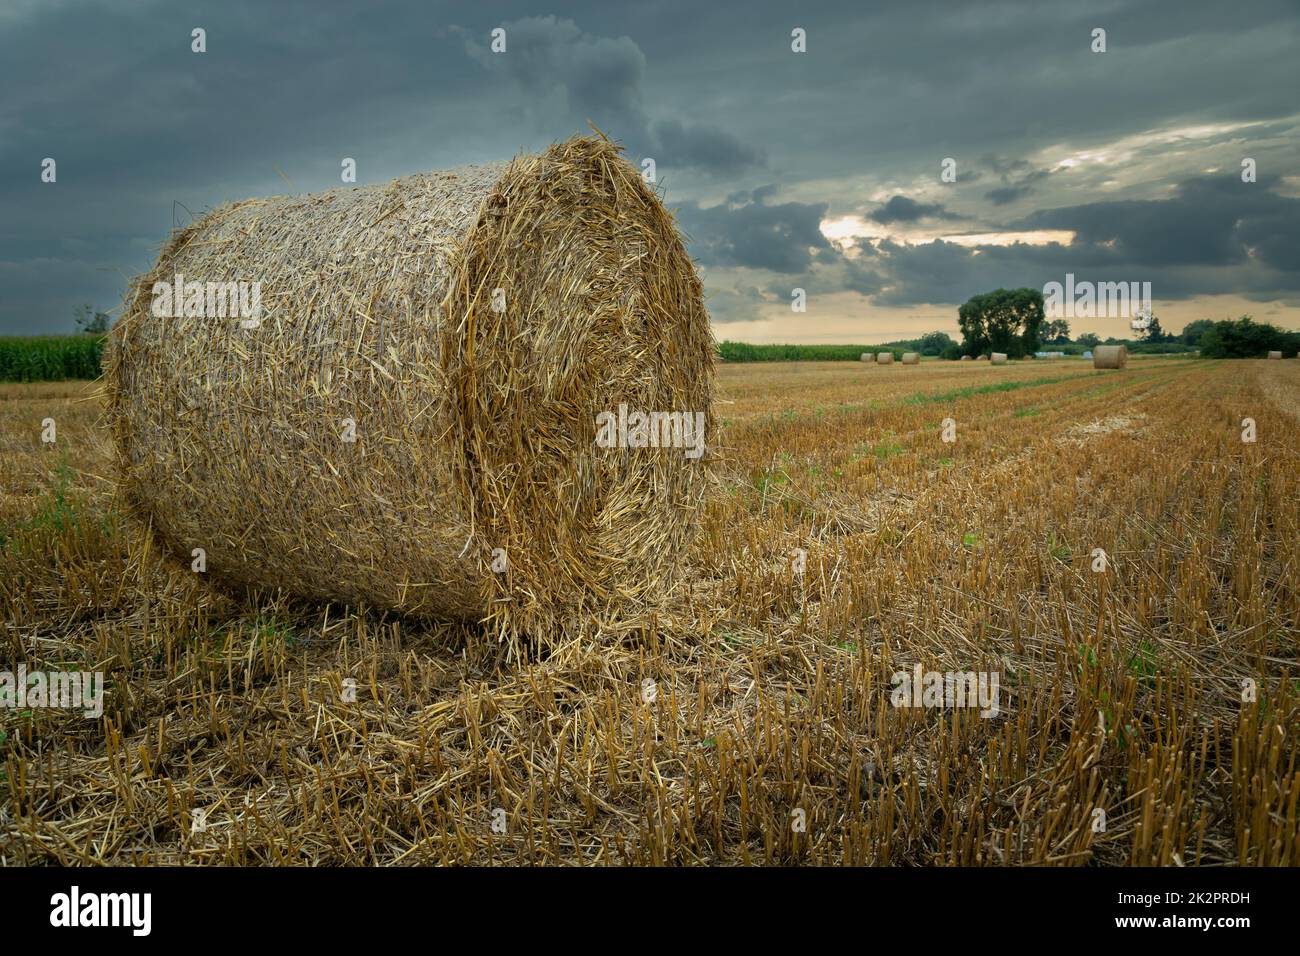 Huge bale of hay in the field and cloudy sky Stock Photo